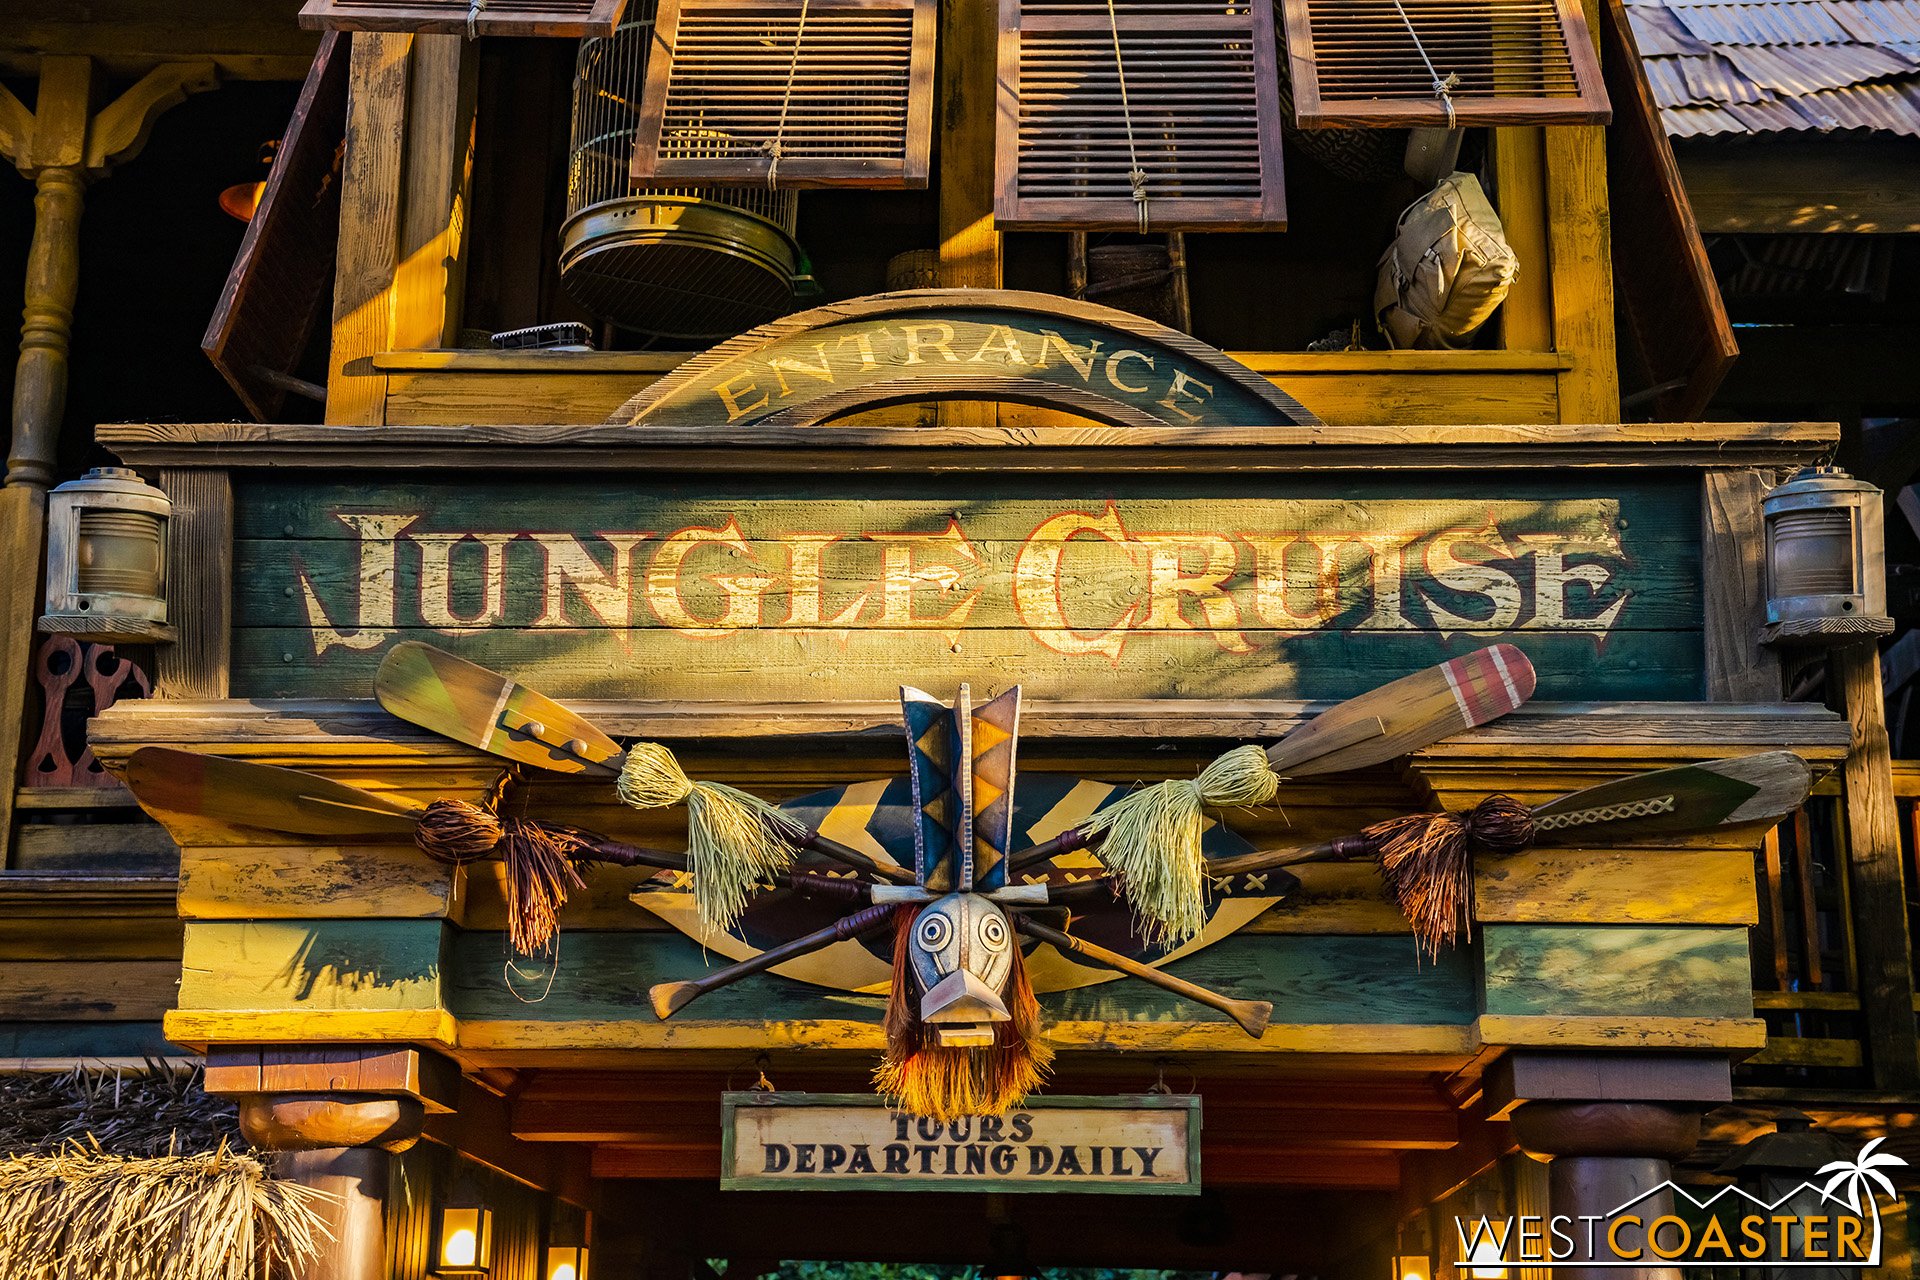  Welcome to the world-famous Jungle Cruise! 